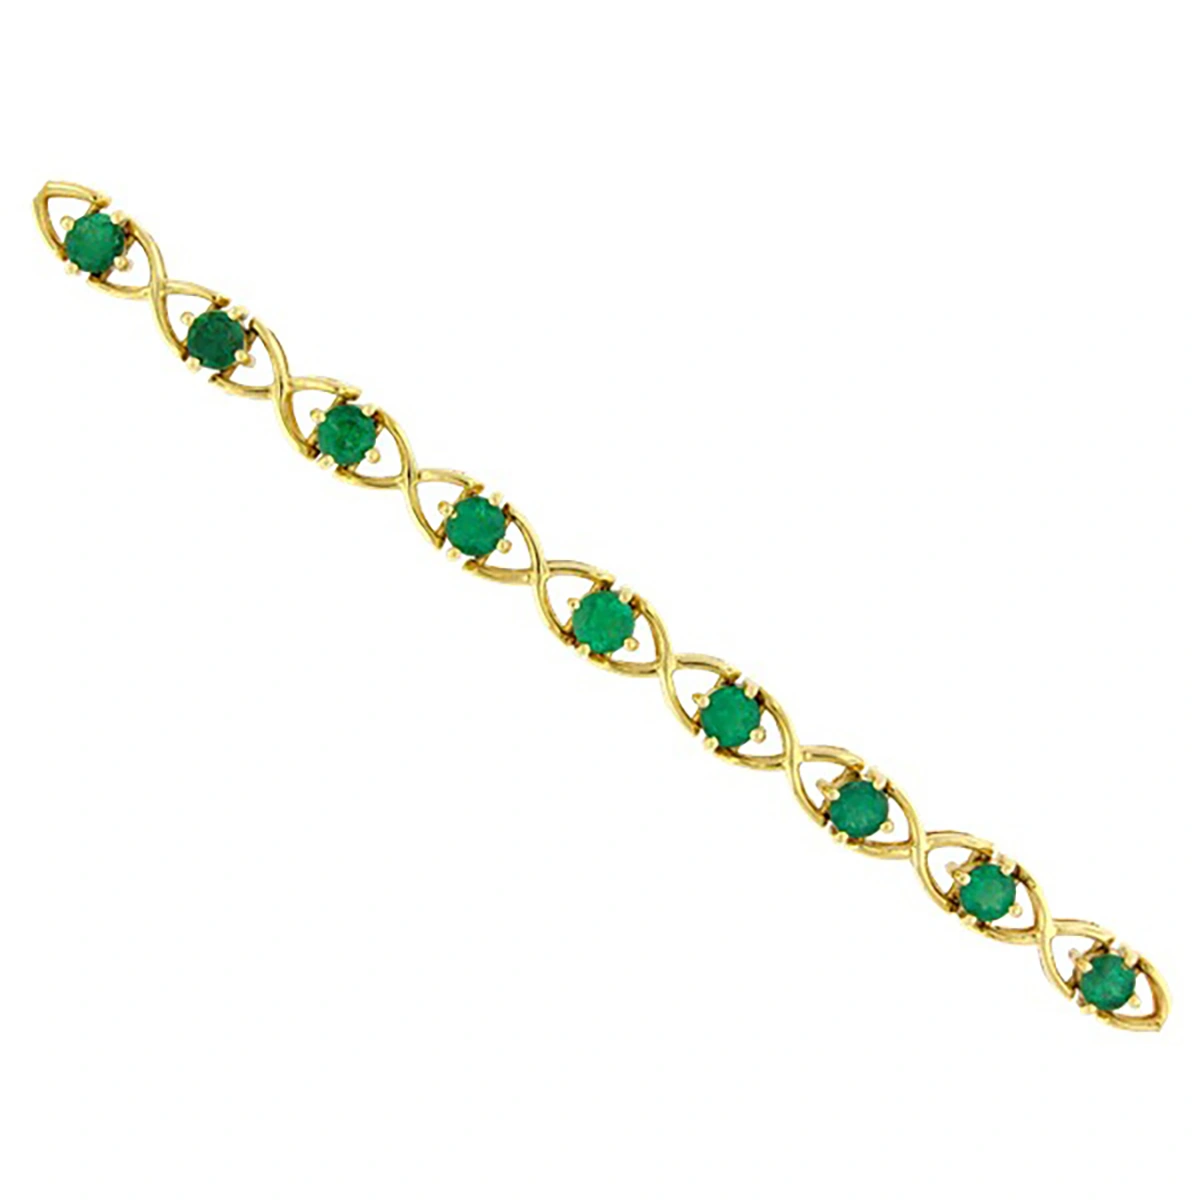 18K Yellow Gold Emerald Bracelet With 16 Round Cut Natural Colombian Emeralds